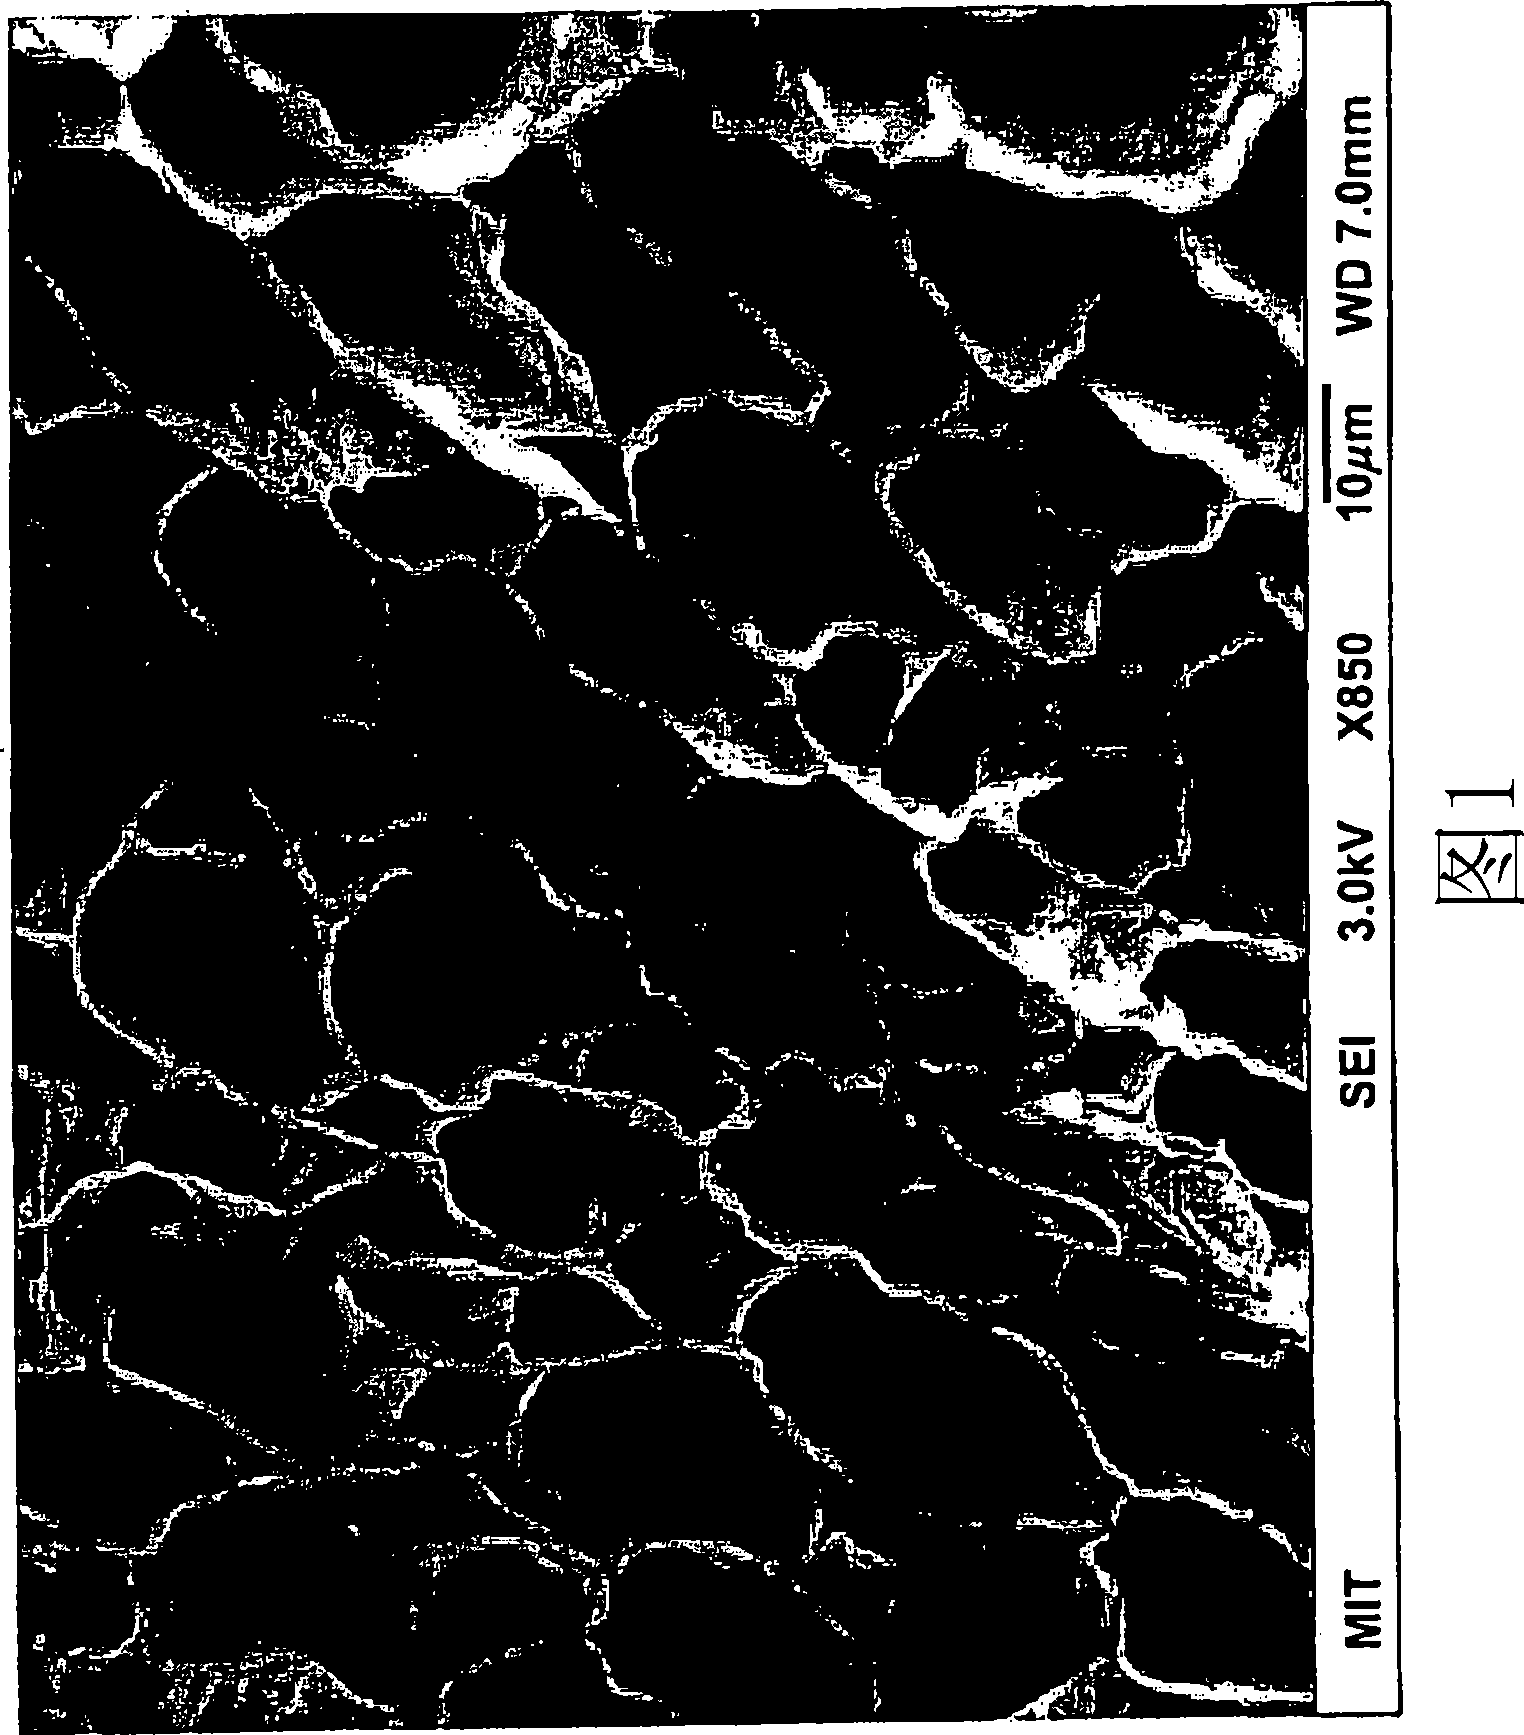 Compositions and methods for inhibiting adhesions